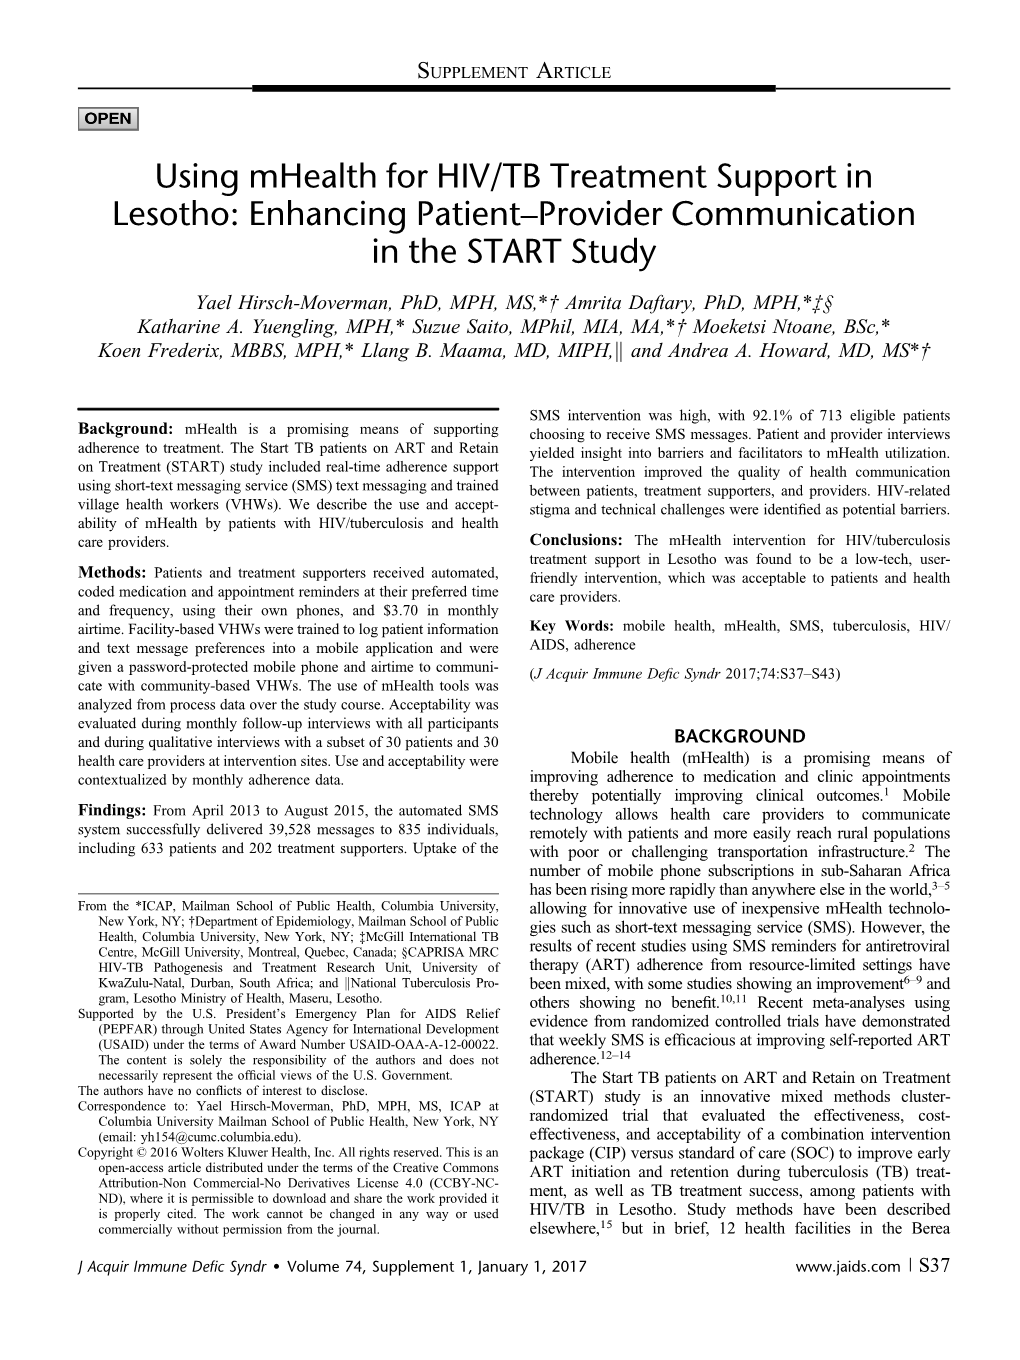 Using Mhealth for HIV/TB Treatment Support in Lesotho: Enhancing Patient–Provider Communication in the START Study